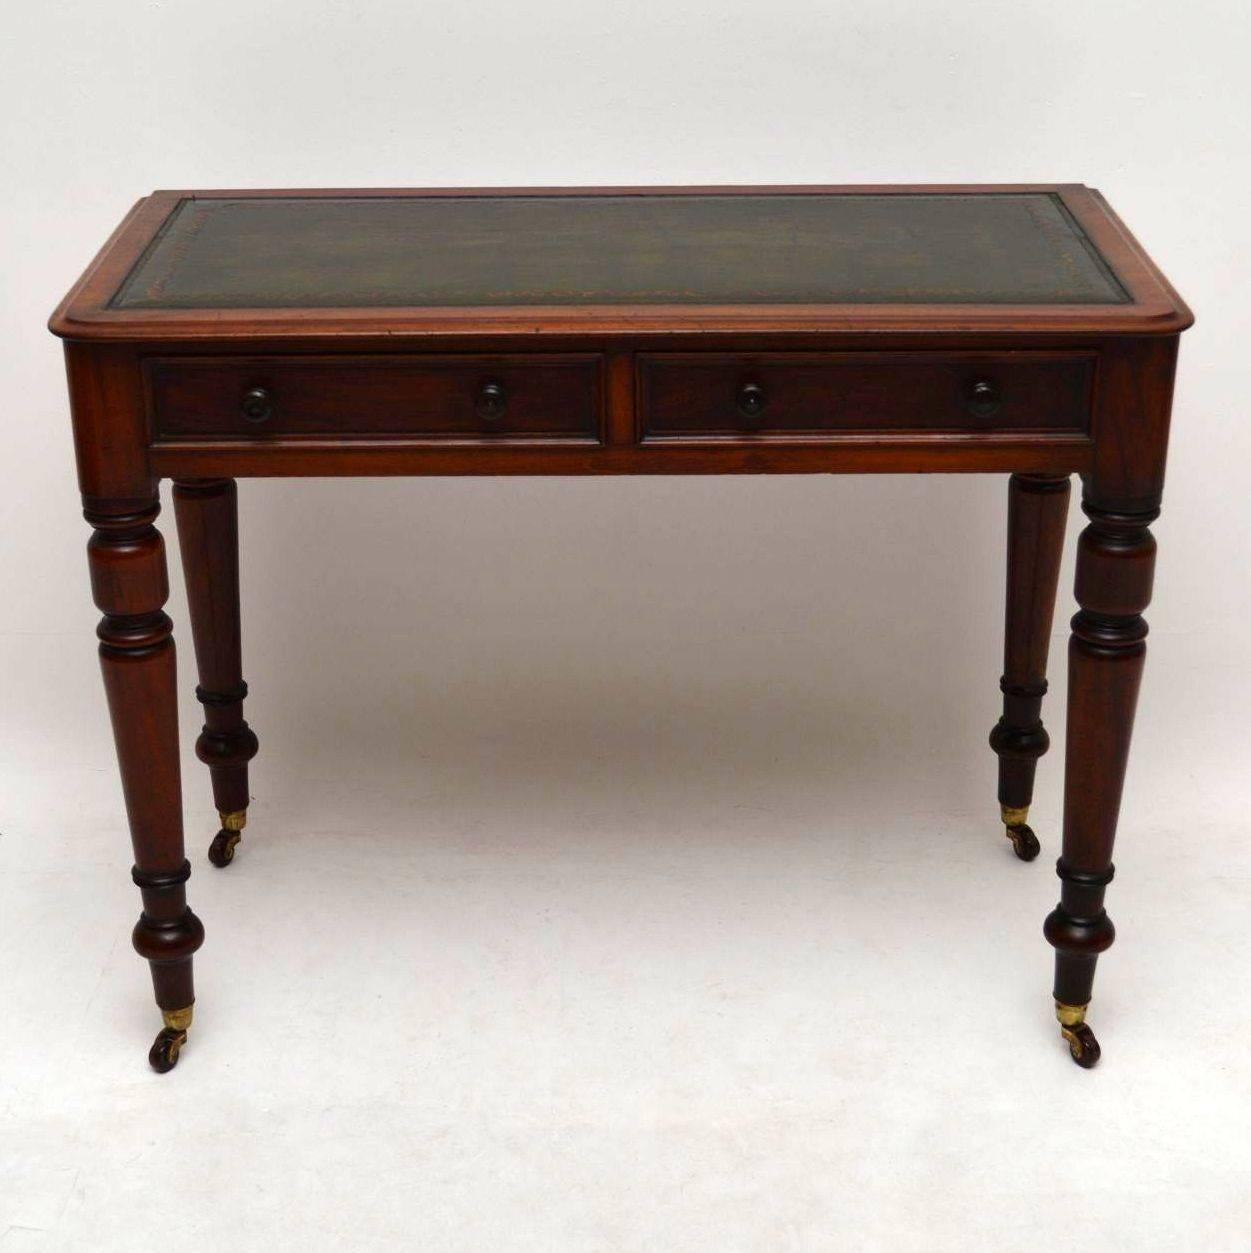 Antique early Victorian leather top mahogany writing table in good condition and dating from the 1840s-1860s period. It has a tooled leather writing surface, two drawers with original turned bun handles and well turned legs with brass capped